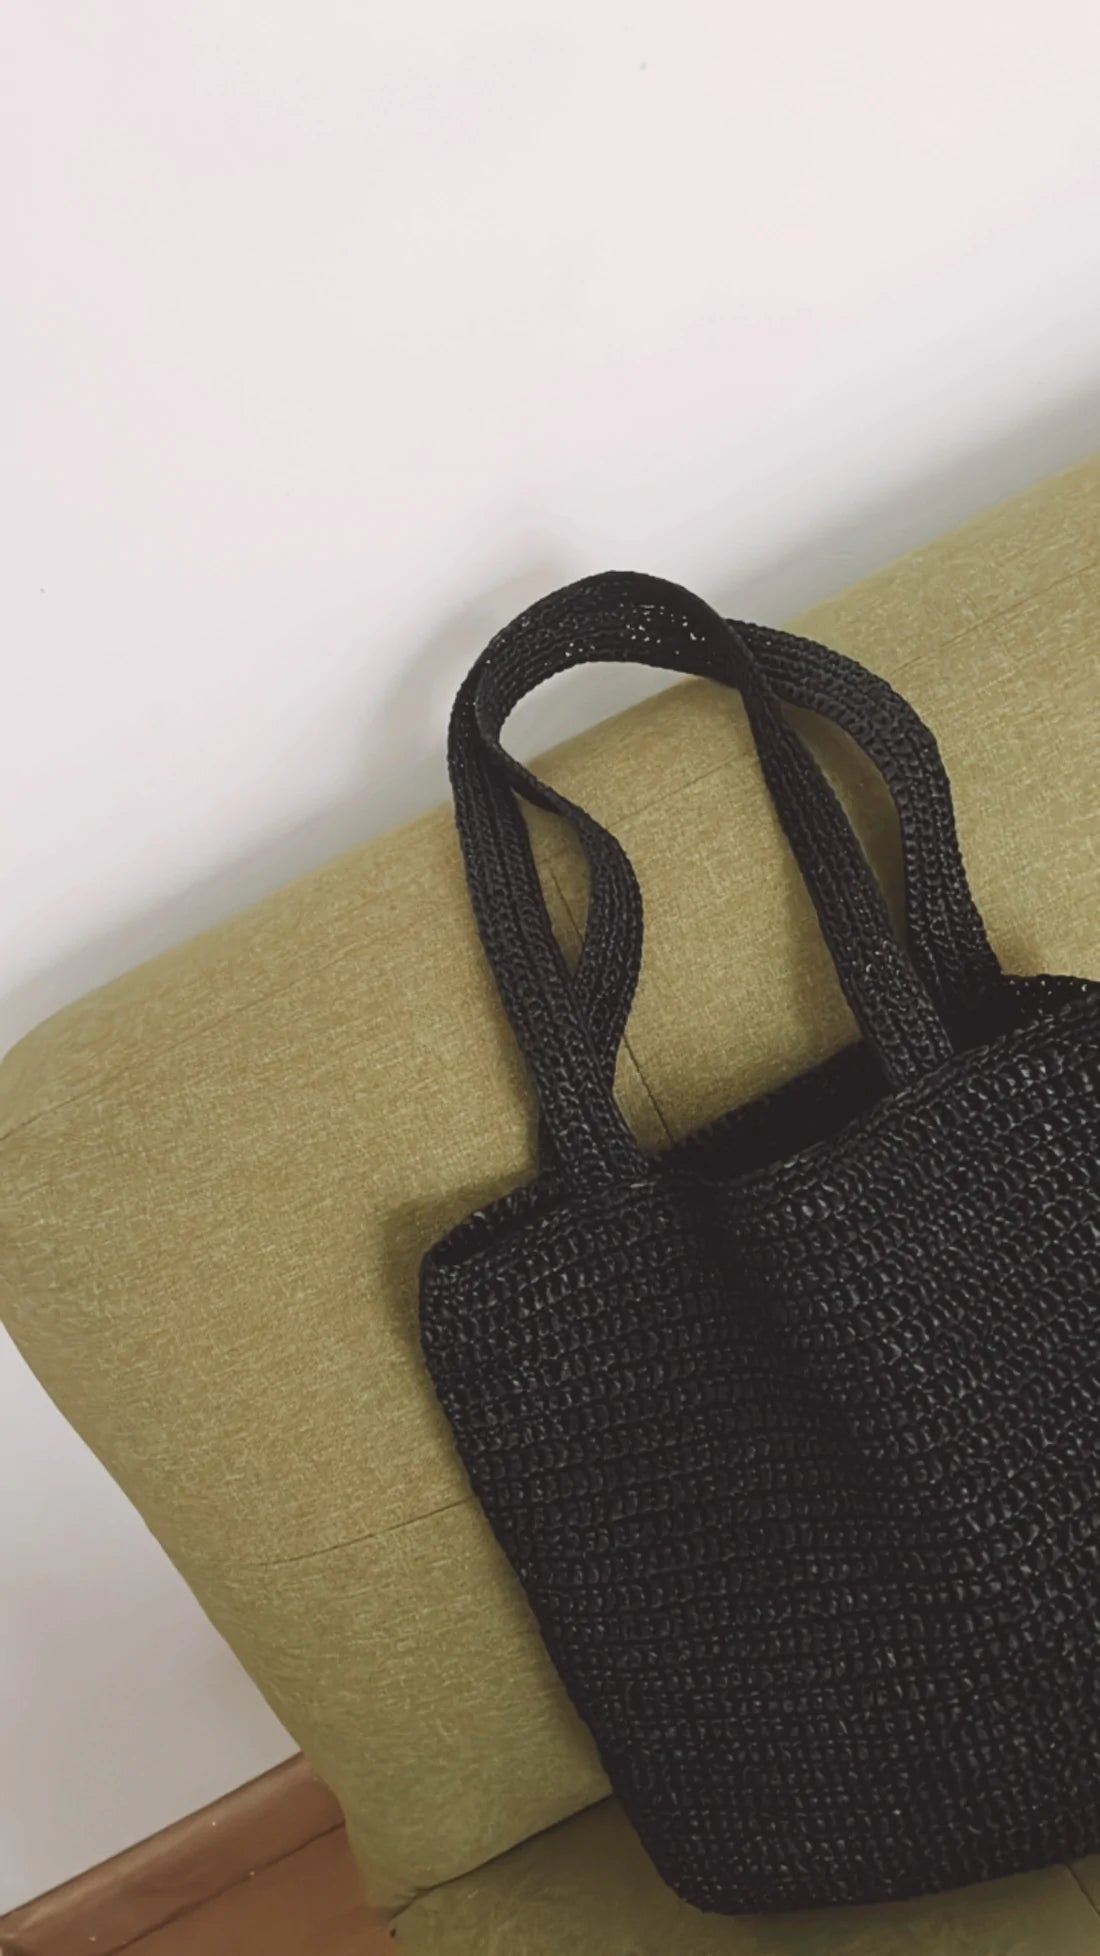 TOTE AIRE BAG